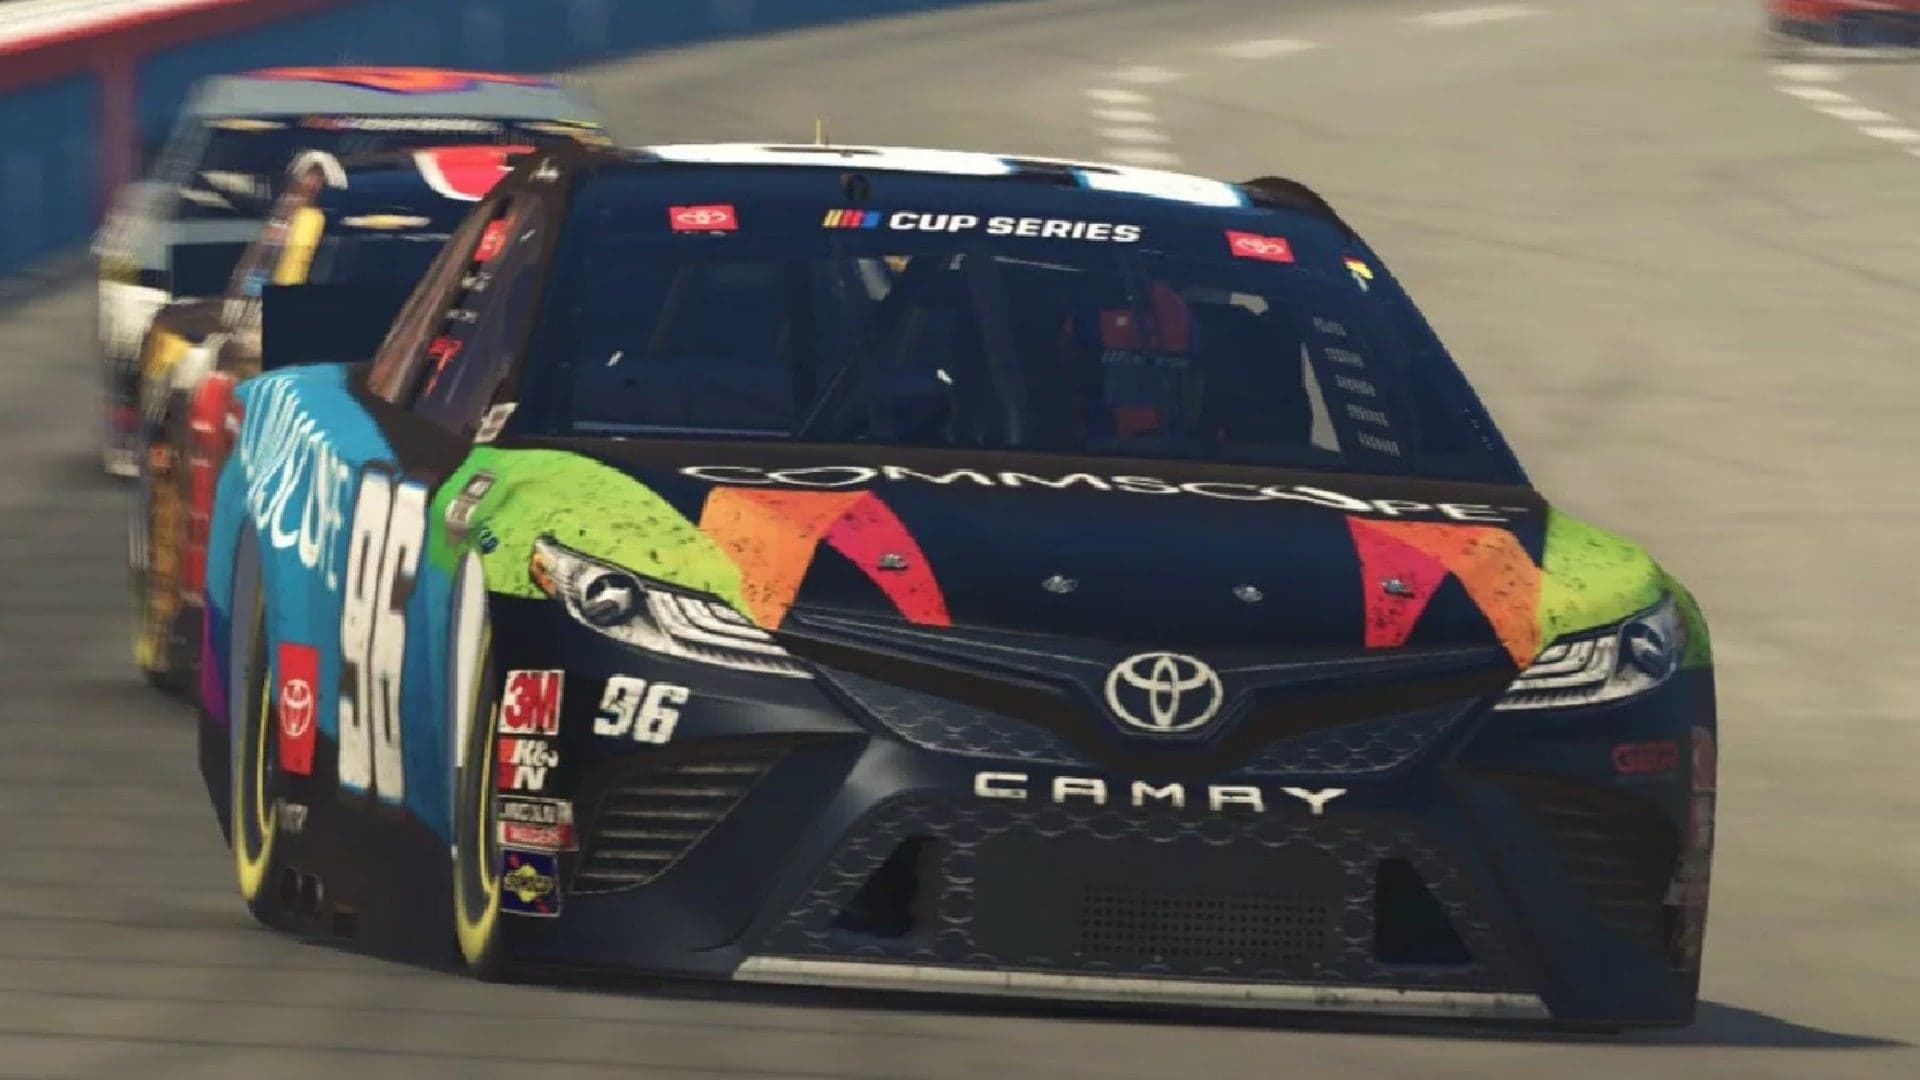 Sim Racing Is Getting So Serious a NASCAR Driver Got Parked for Crashing